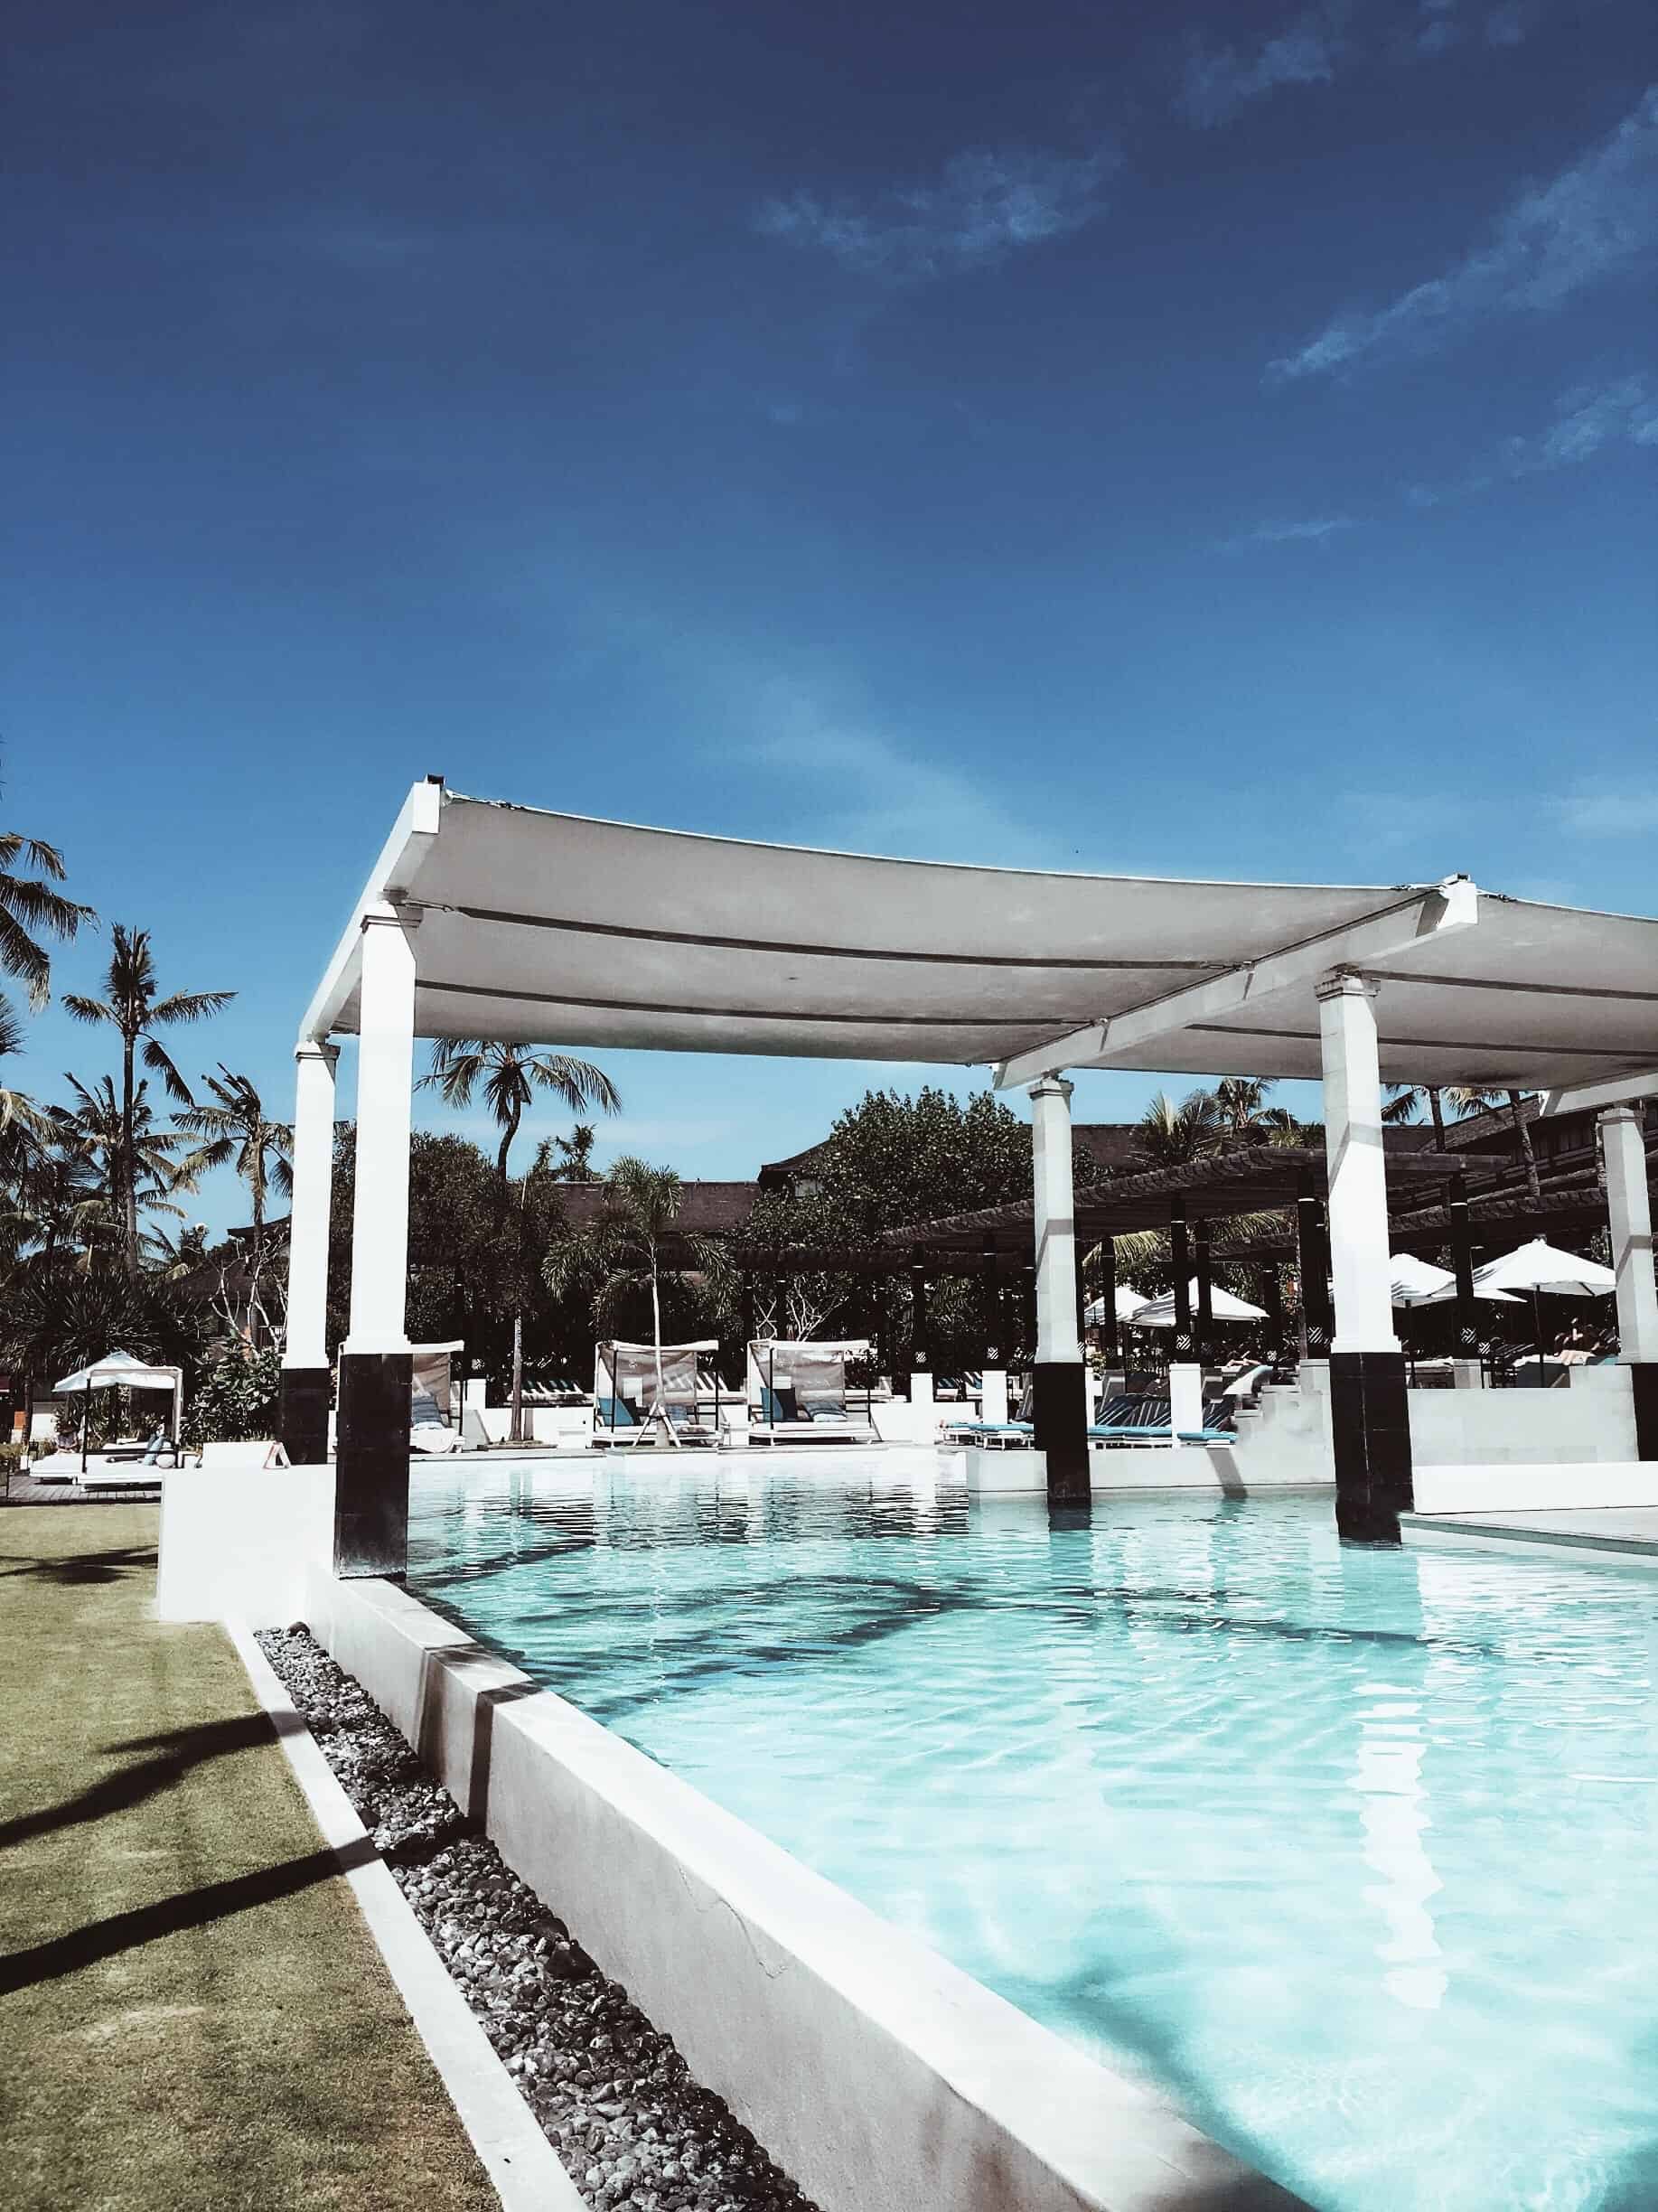 One of the ways to put a shade over your swimming pool is to install a permanent shade structure #pool #shade #backyard #outdoor #howto 